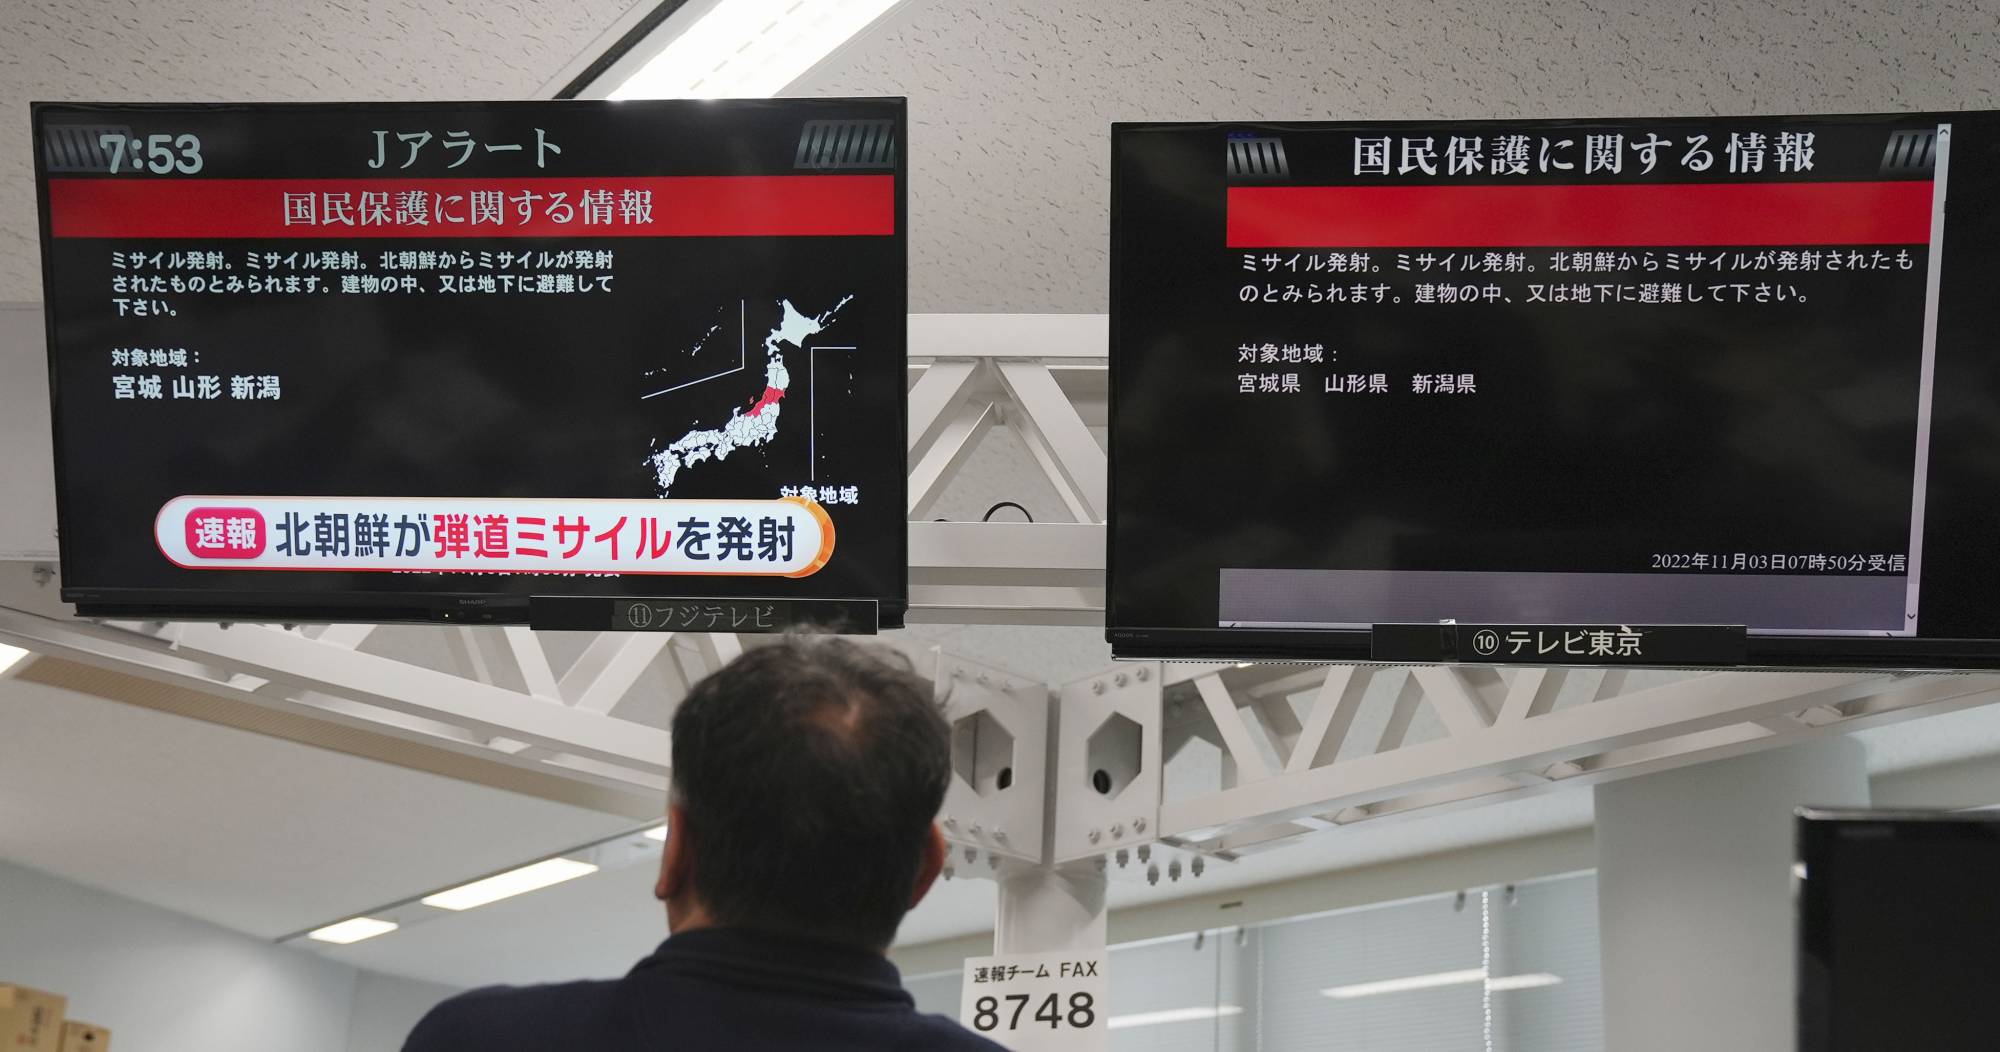 A J-Alert emergency broadcasting system warning of a North Korean ballistic missile launch is seen in Tokyo on Thursday. | KYODO